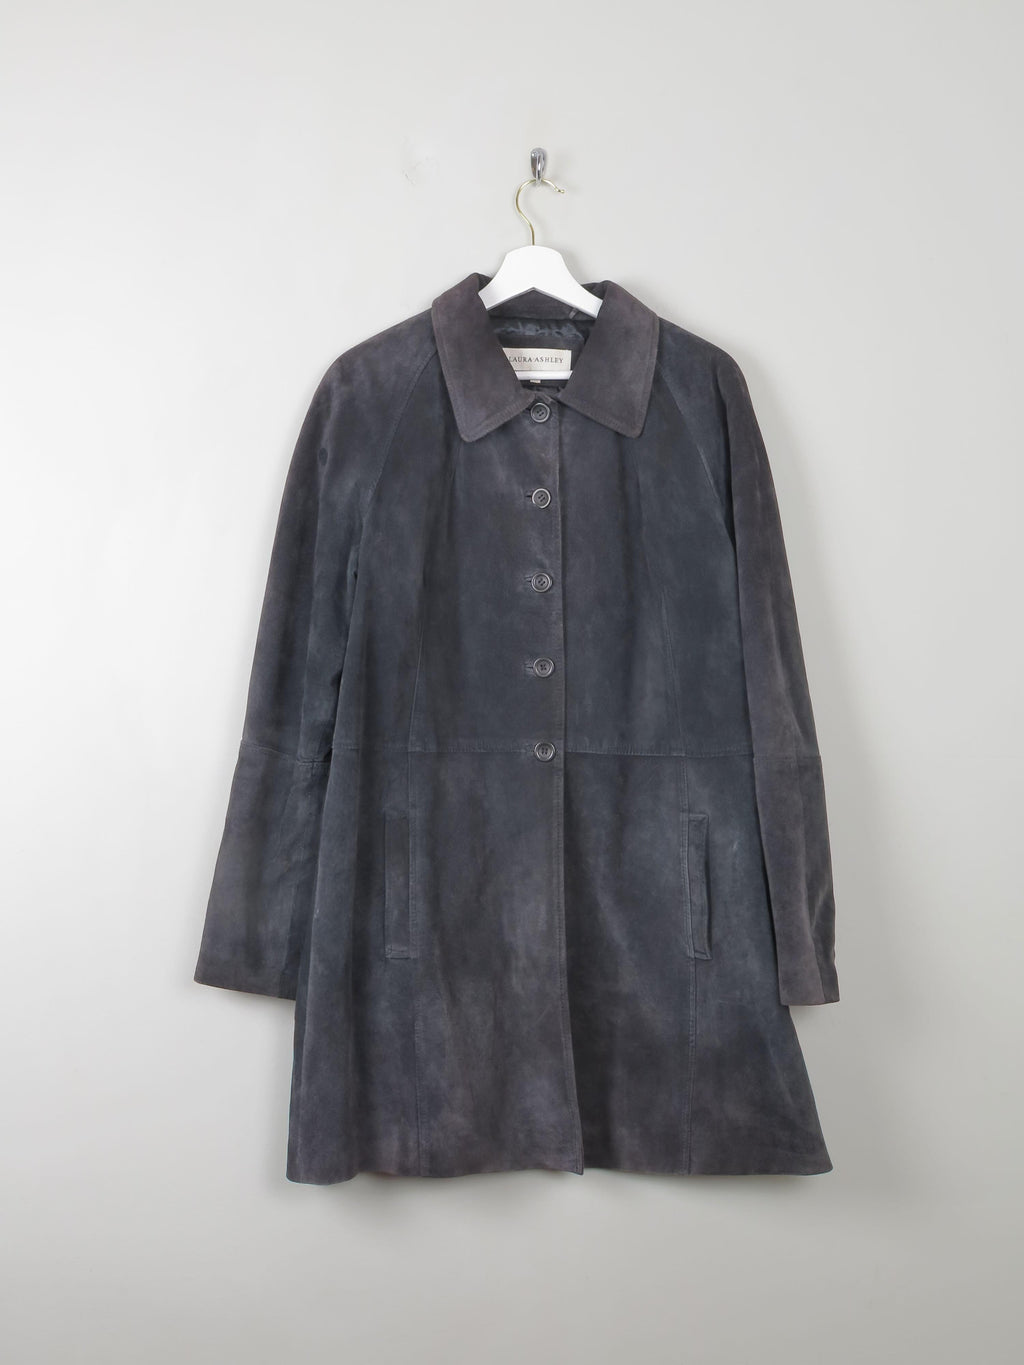 Womens' Vintage Laura Ashley Suede Coat M/L - The Harlequin